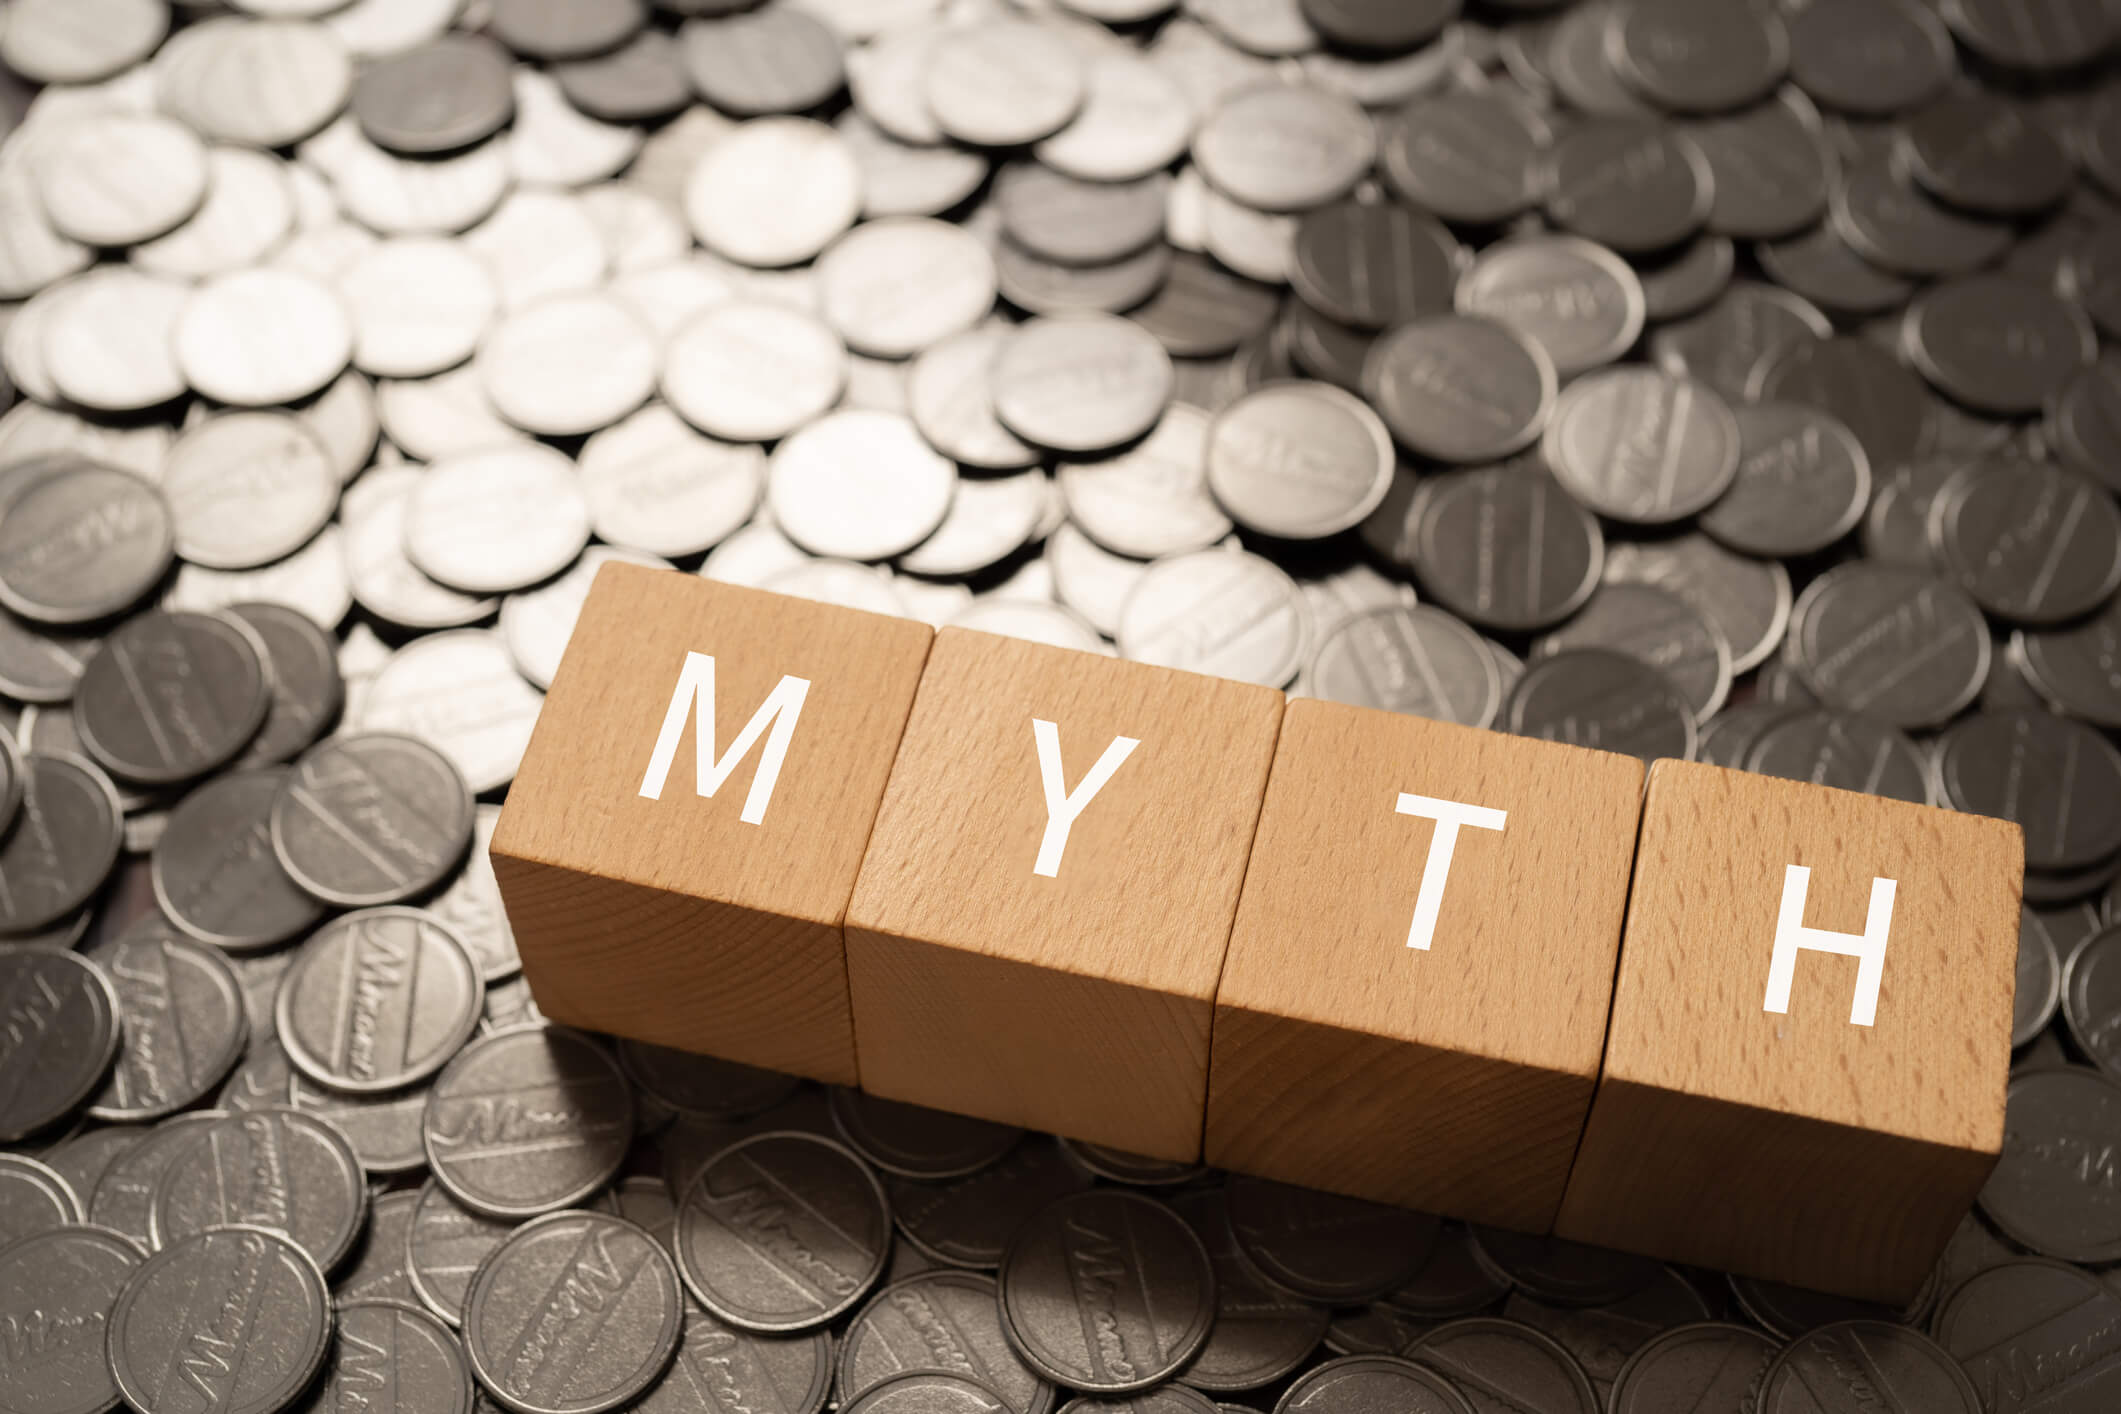 Myths in Investing - Complete Controller